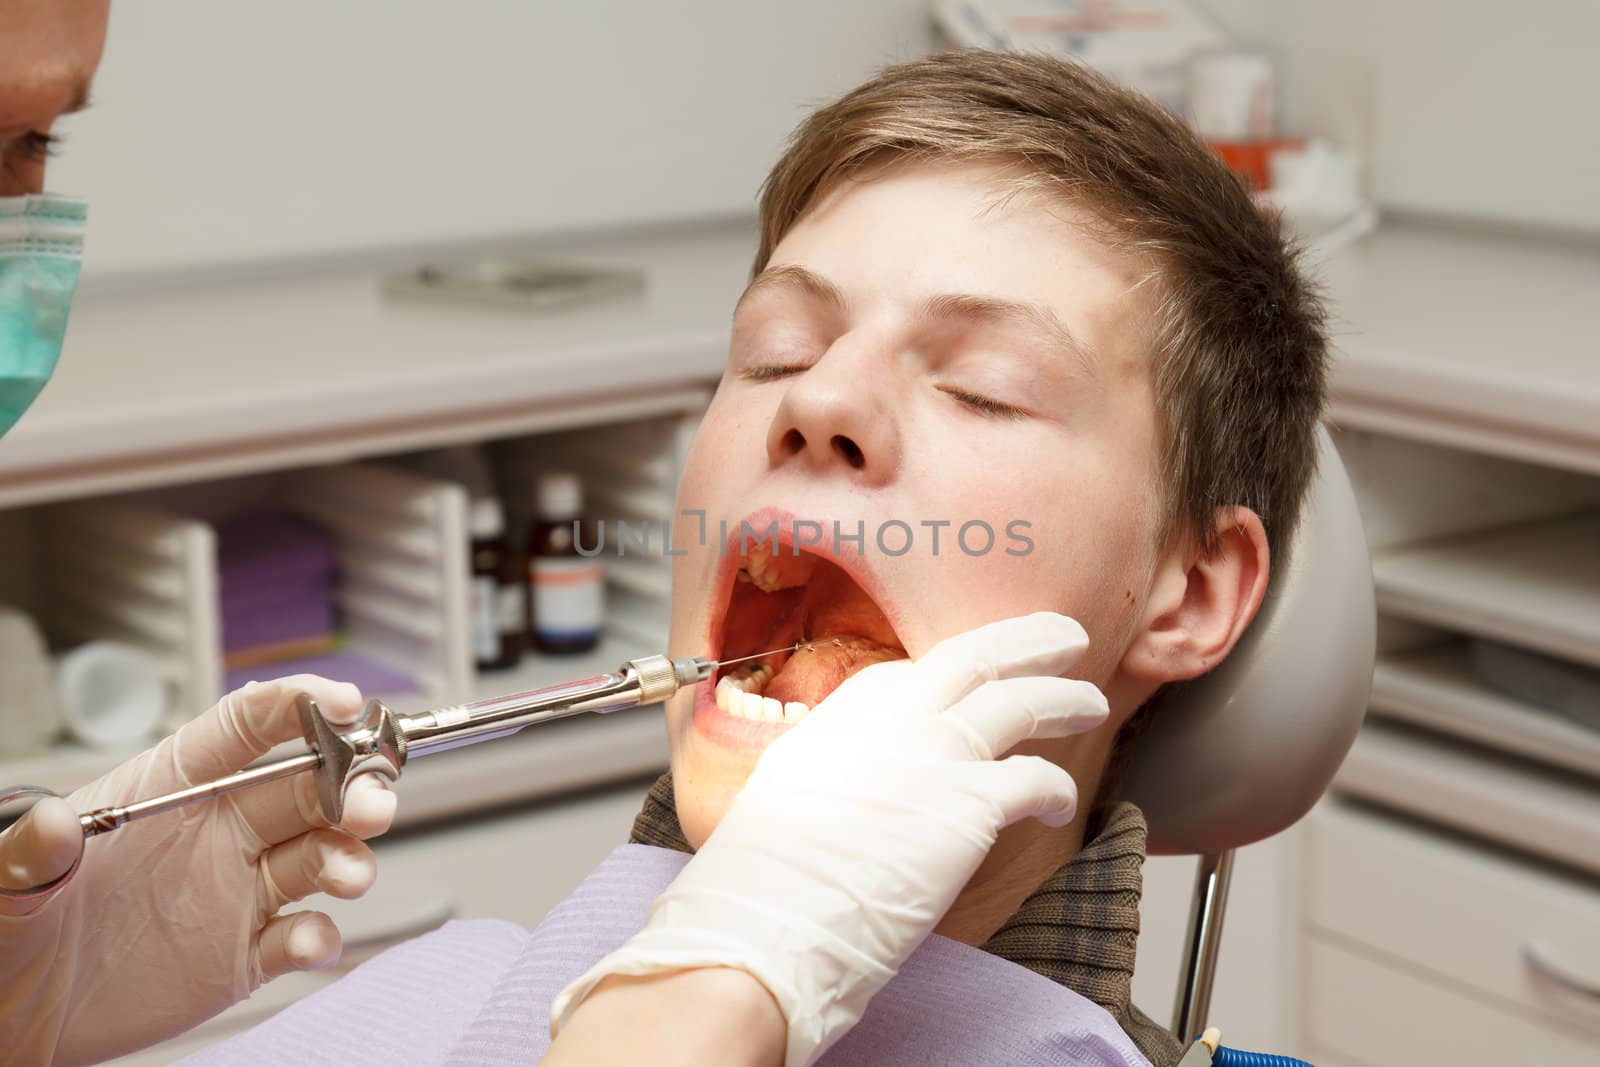 Boy at the dentist with a large syringe receiving anesthesia